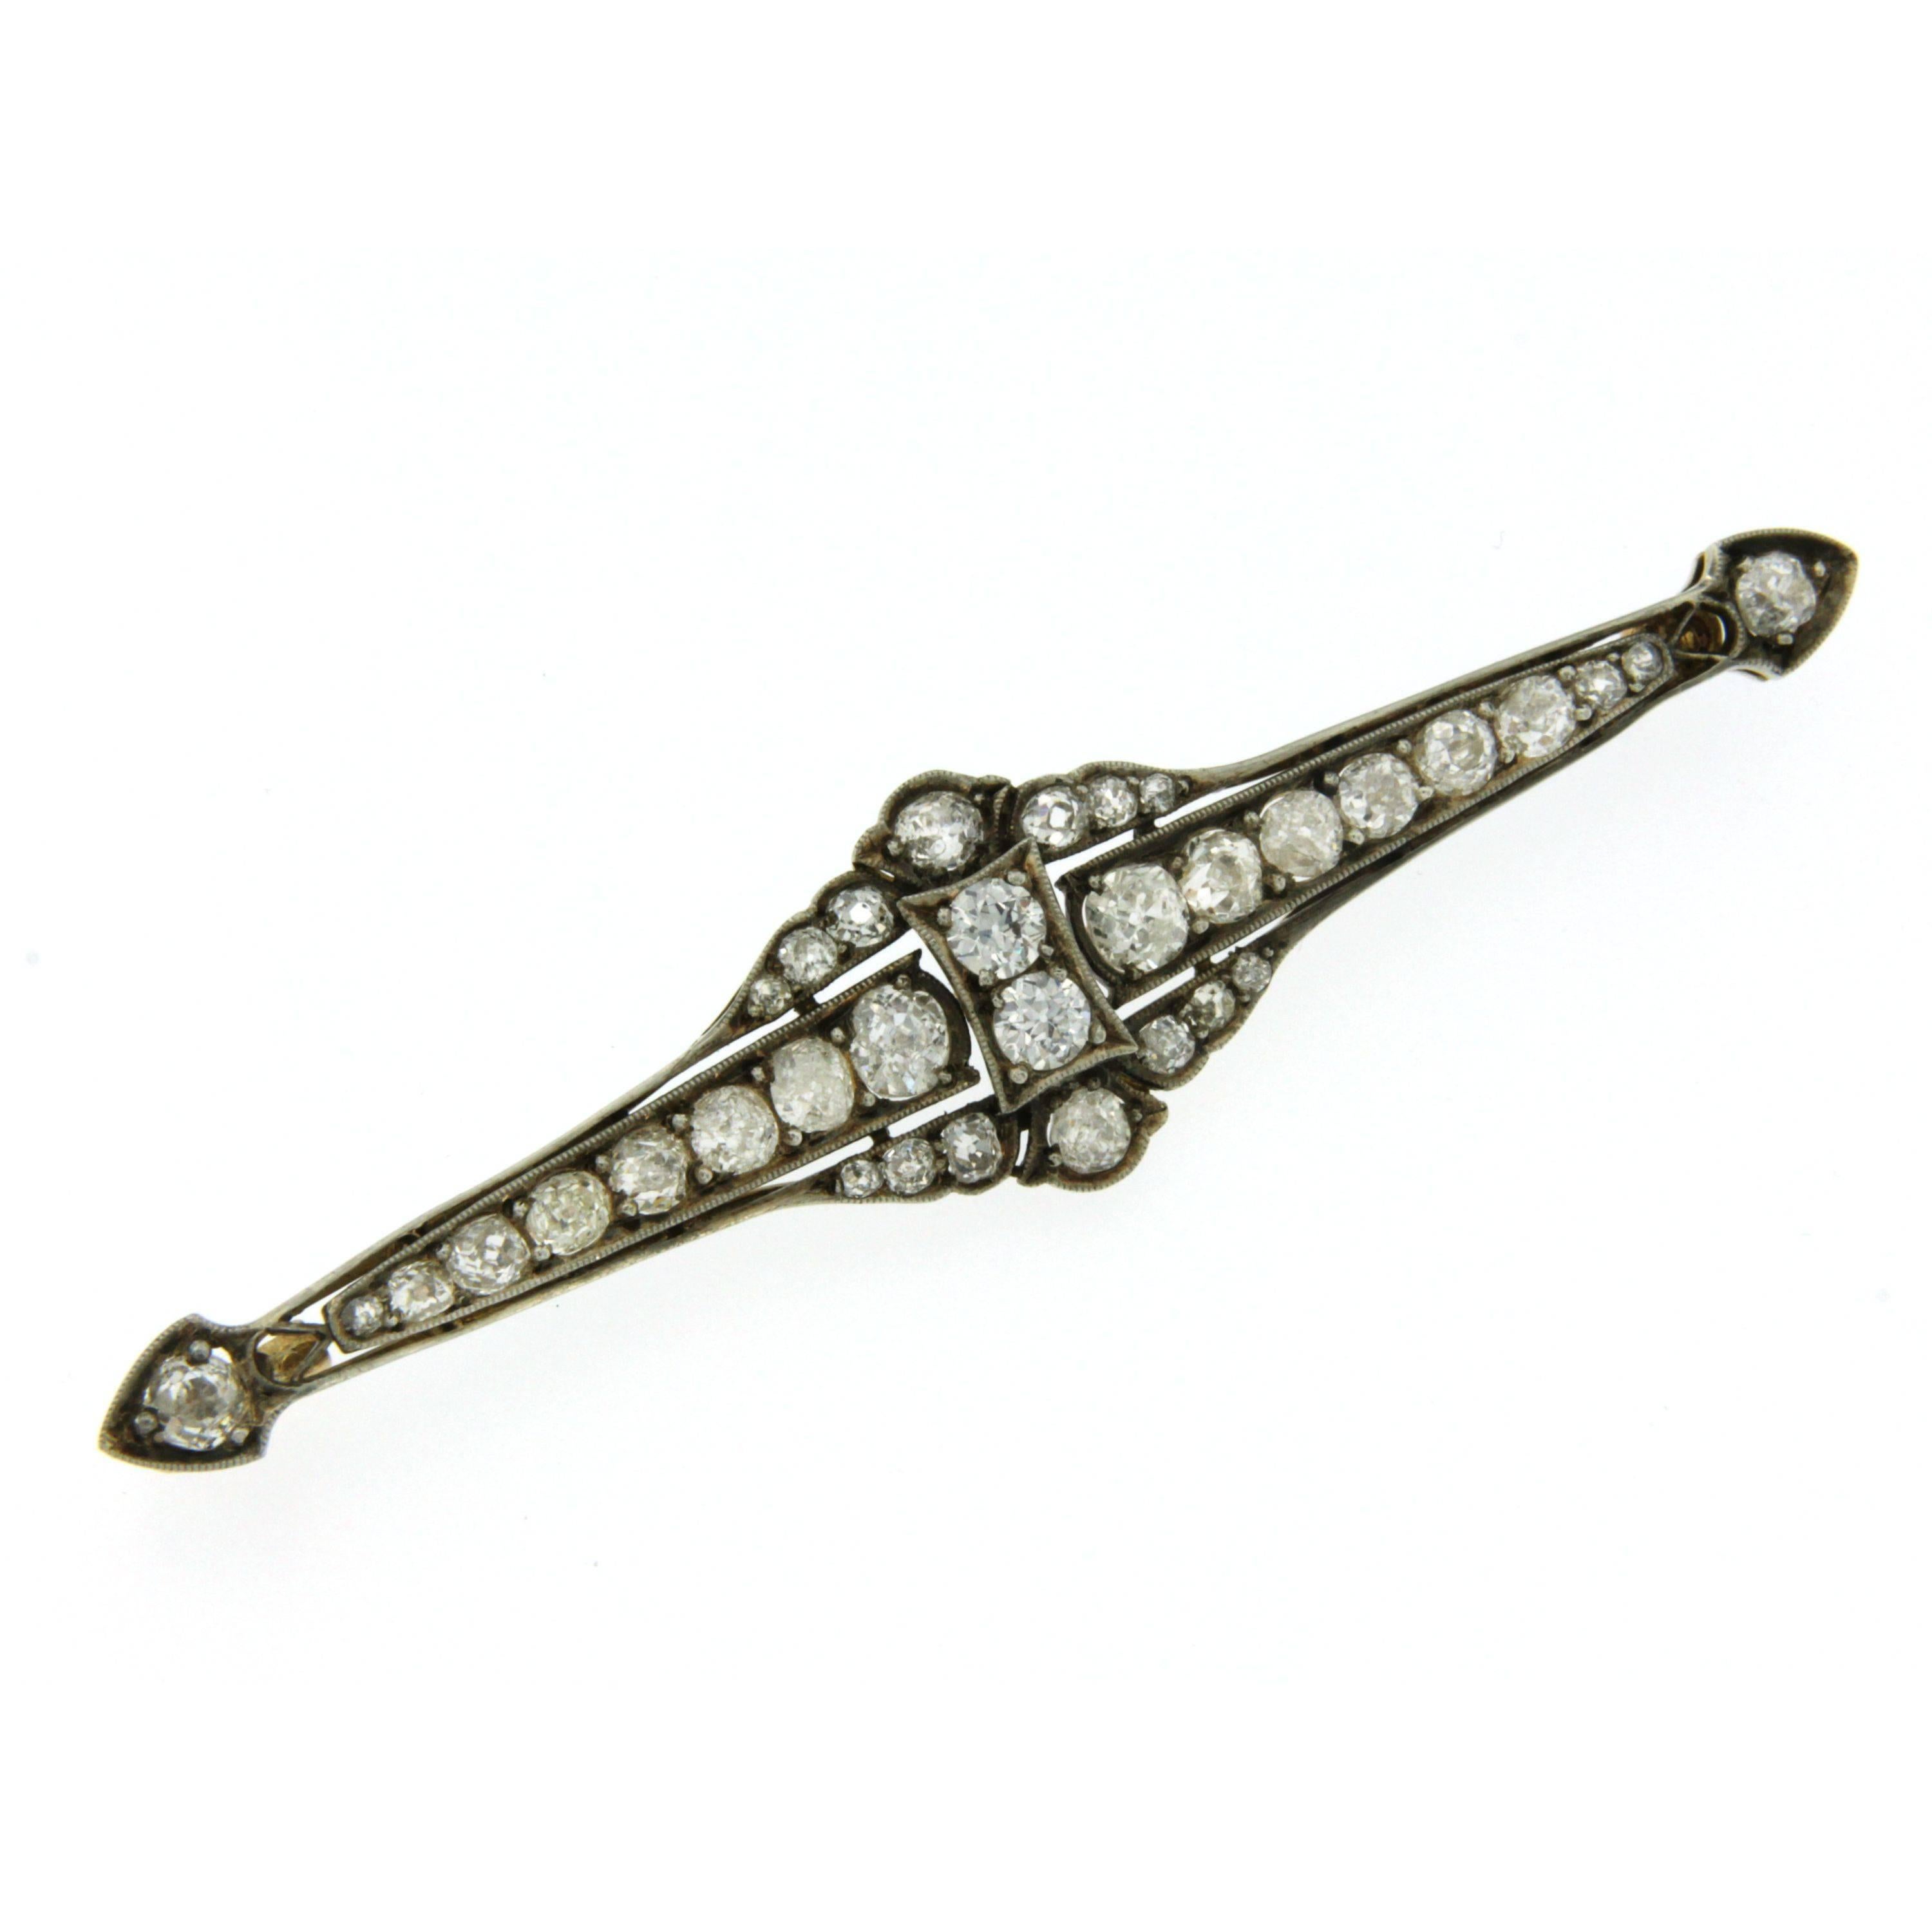 Mounted in 12k gold this exceptional brooch is set with sparkling old mine cut diamonds weighing approximately 3.00 cts F-G color.
Handcrafted during the Edwardian period.

CONDITION: Pre-owned - Excellent 
METAL: 12k Gold 
STONE: Old mine cut